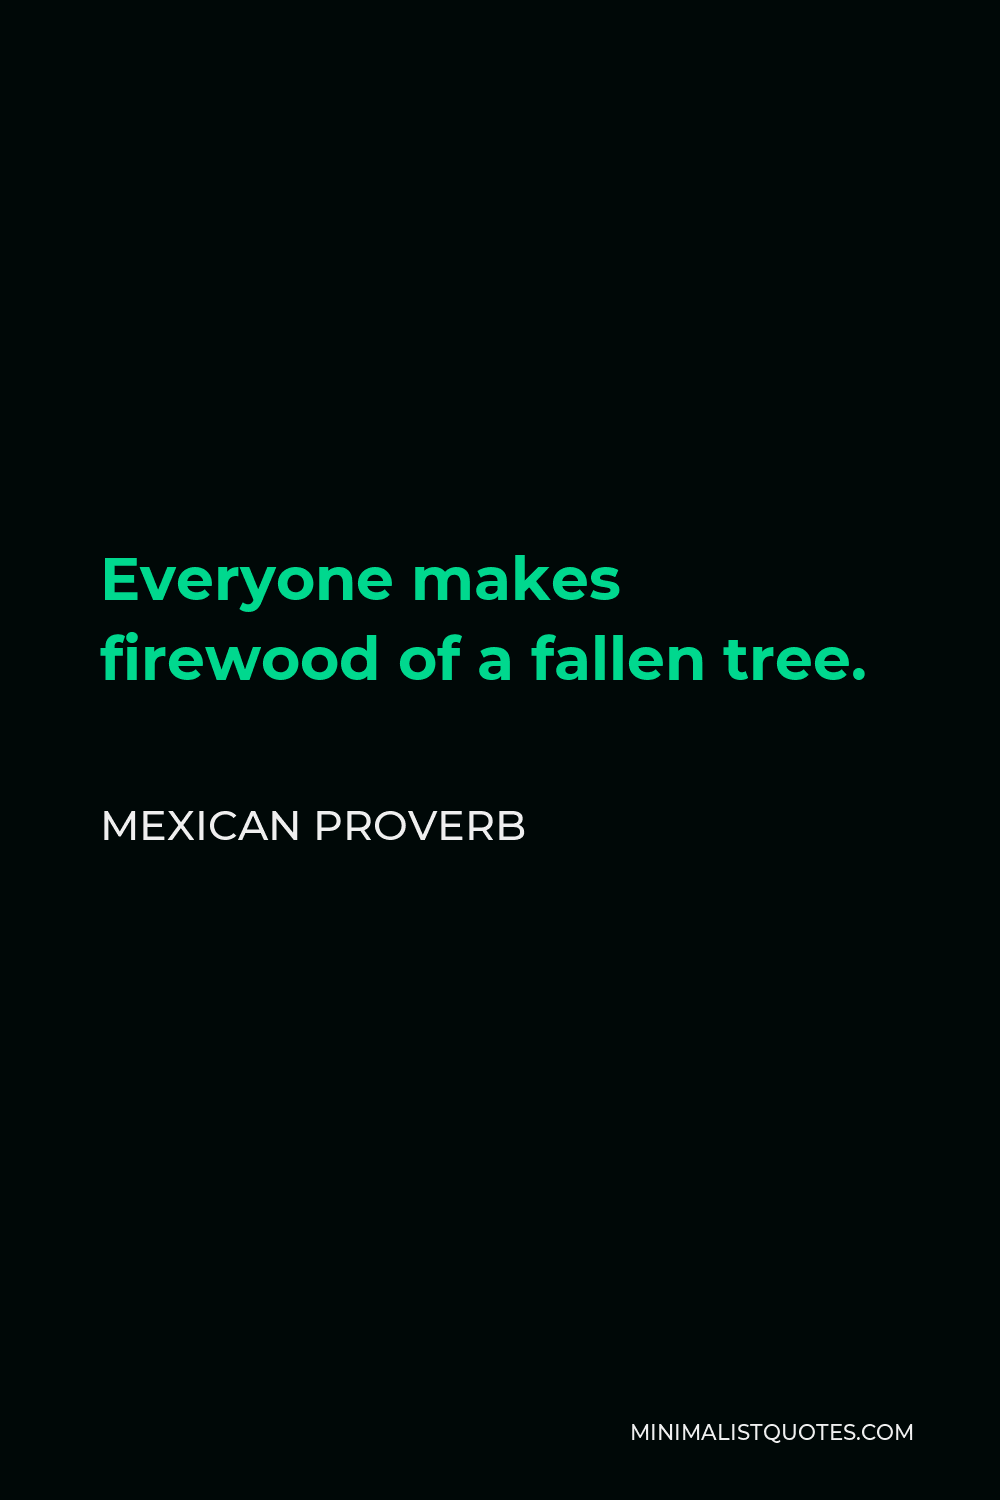 Mexican Proverb Quote - Everyone makes firewood of a fallen tree.